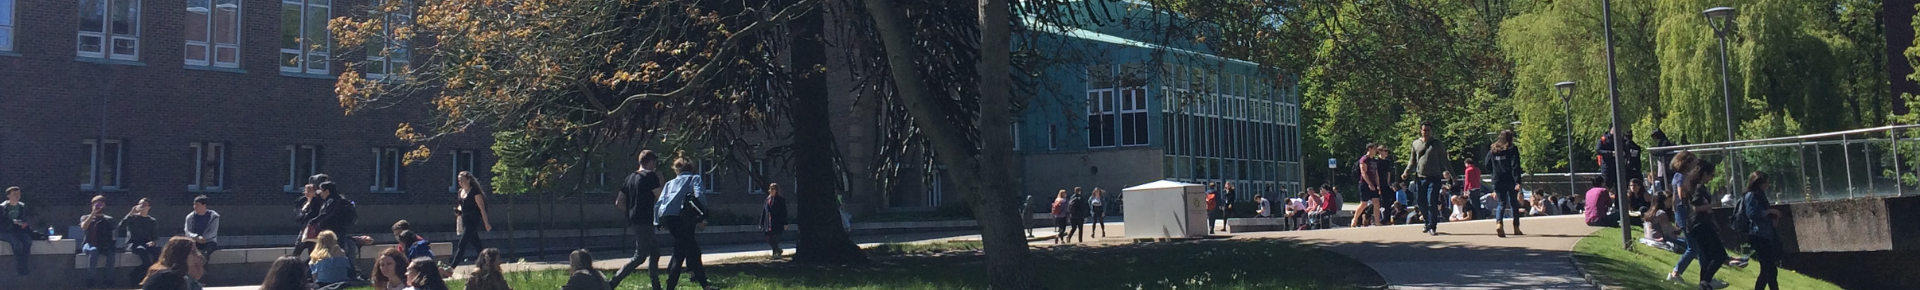 Large group of students on campus